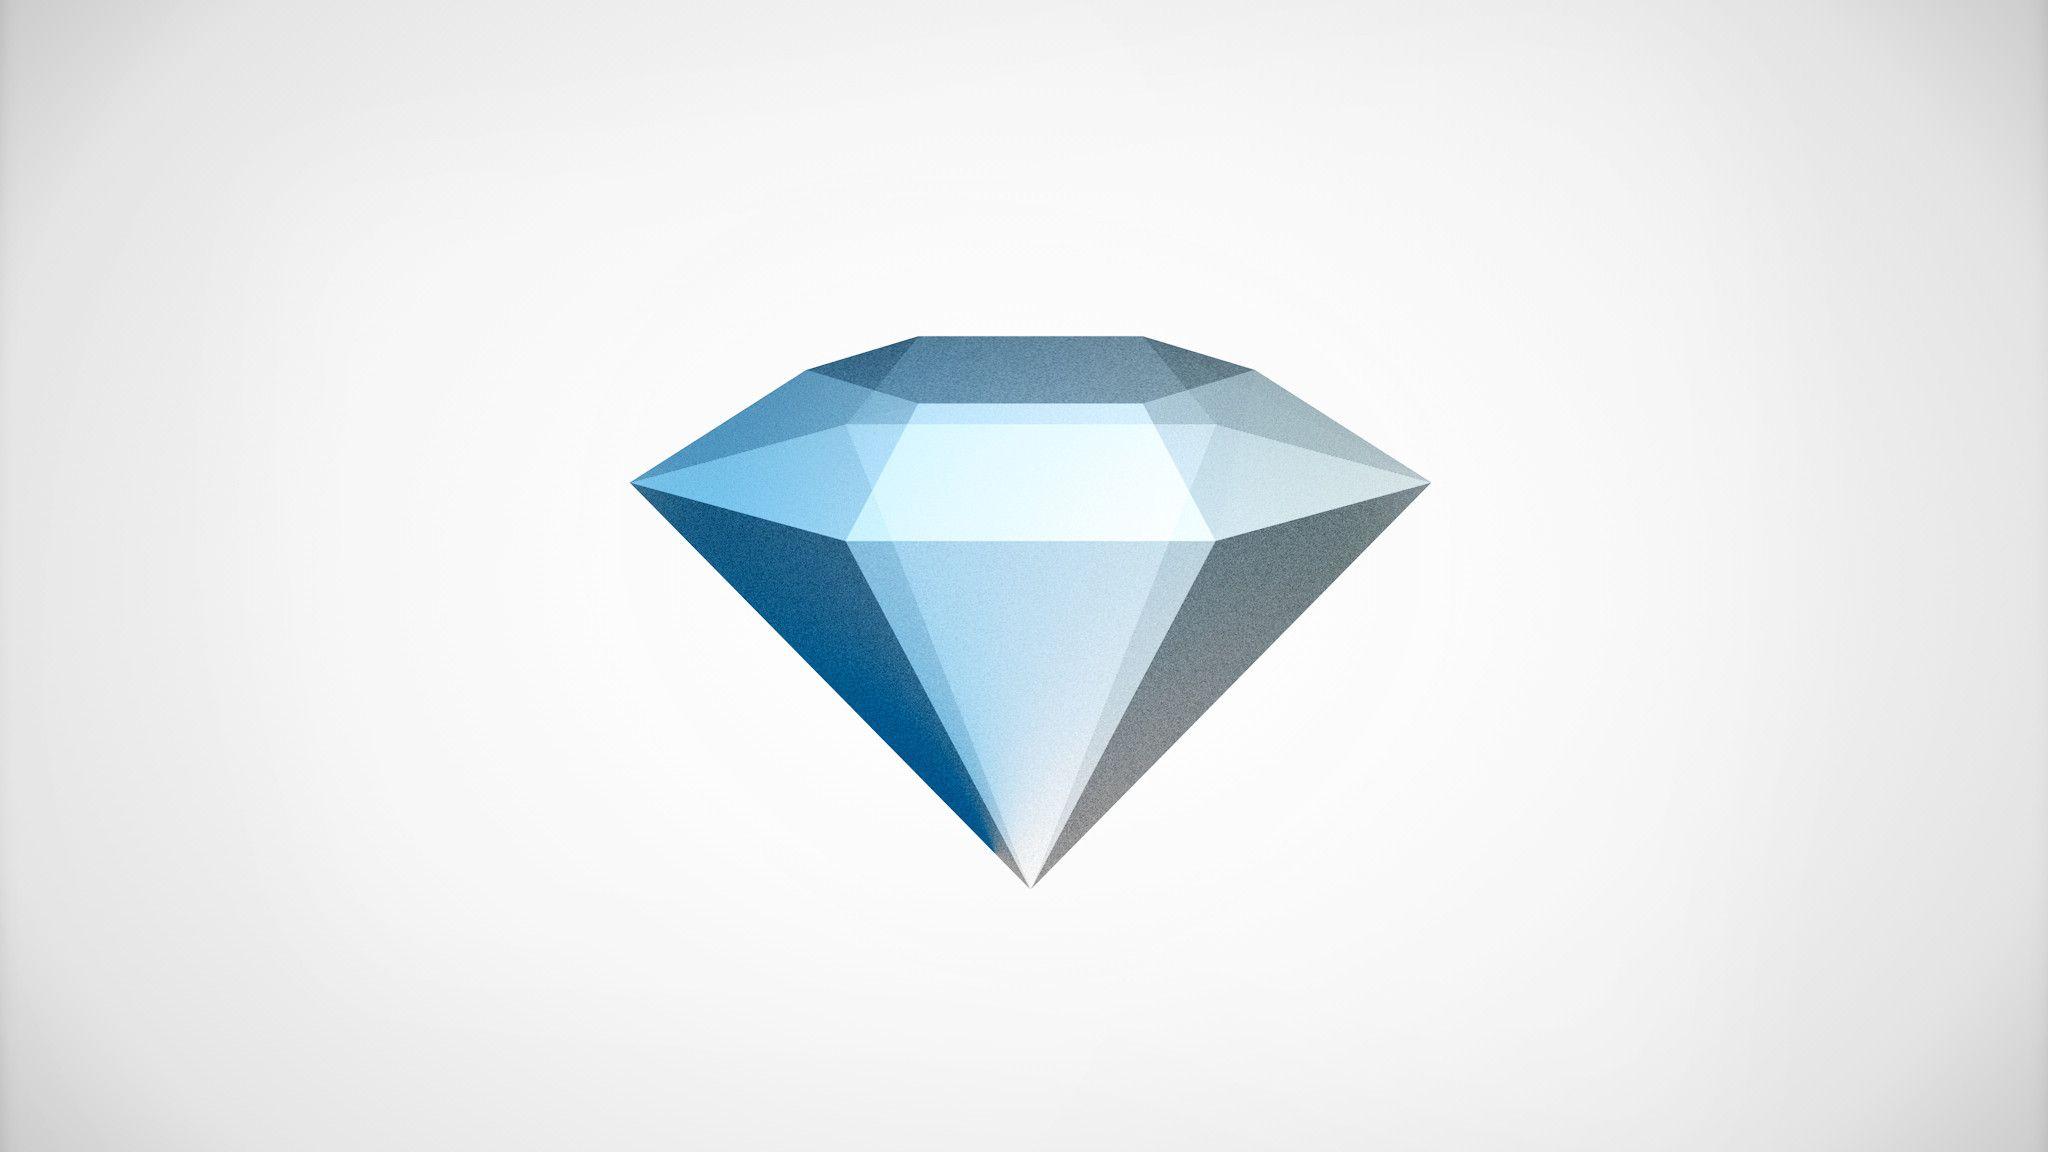 Simple Diamond Wallpapers Top Free Simple Diamond Backgrounds Images, Photos, Reviews